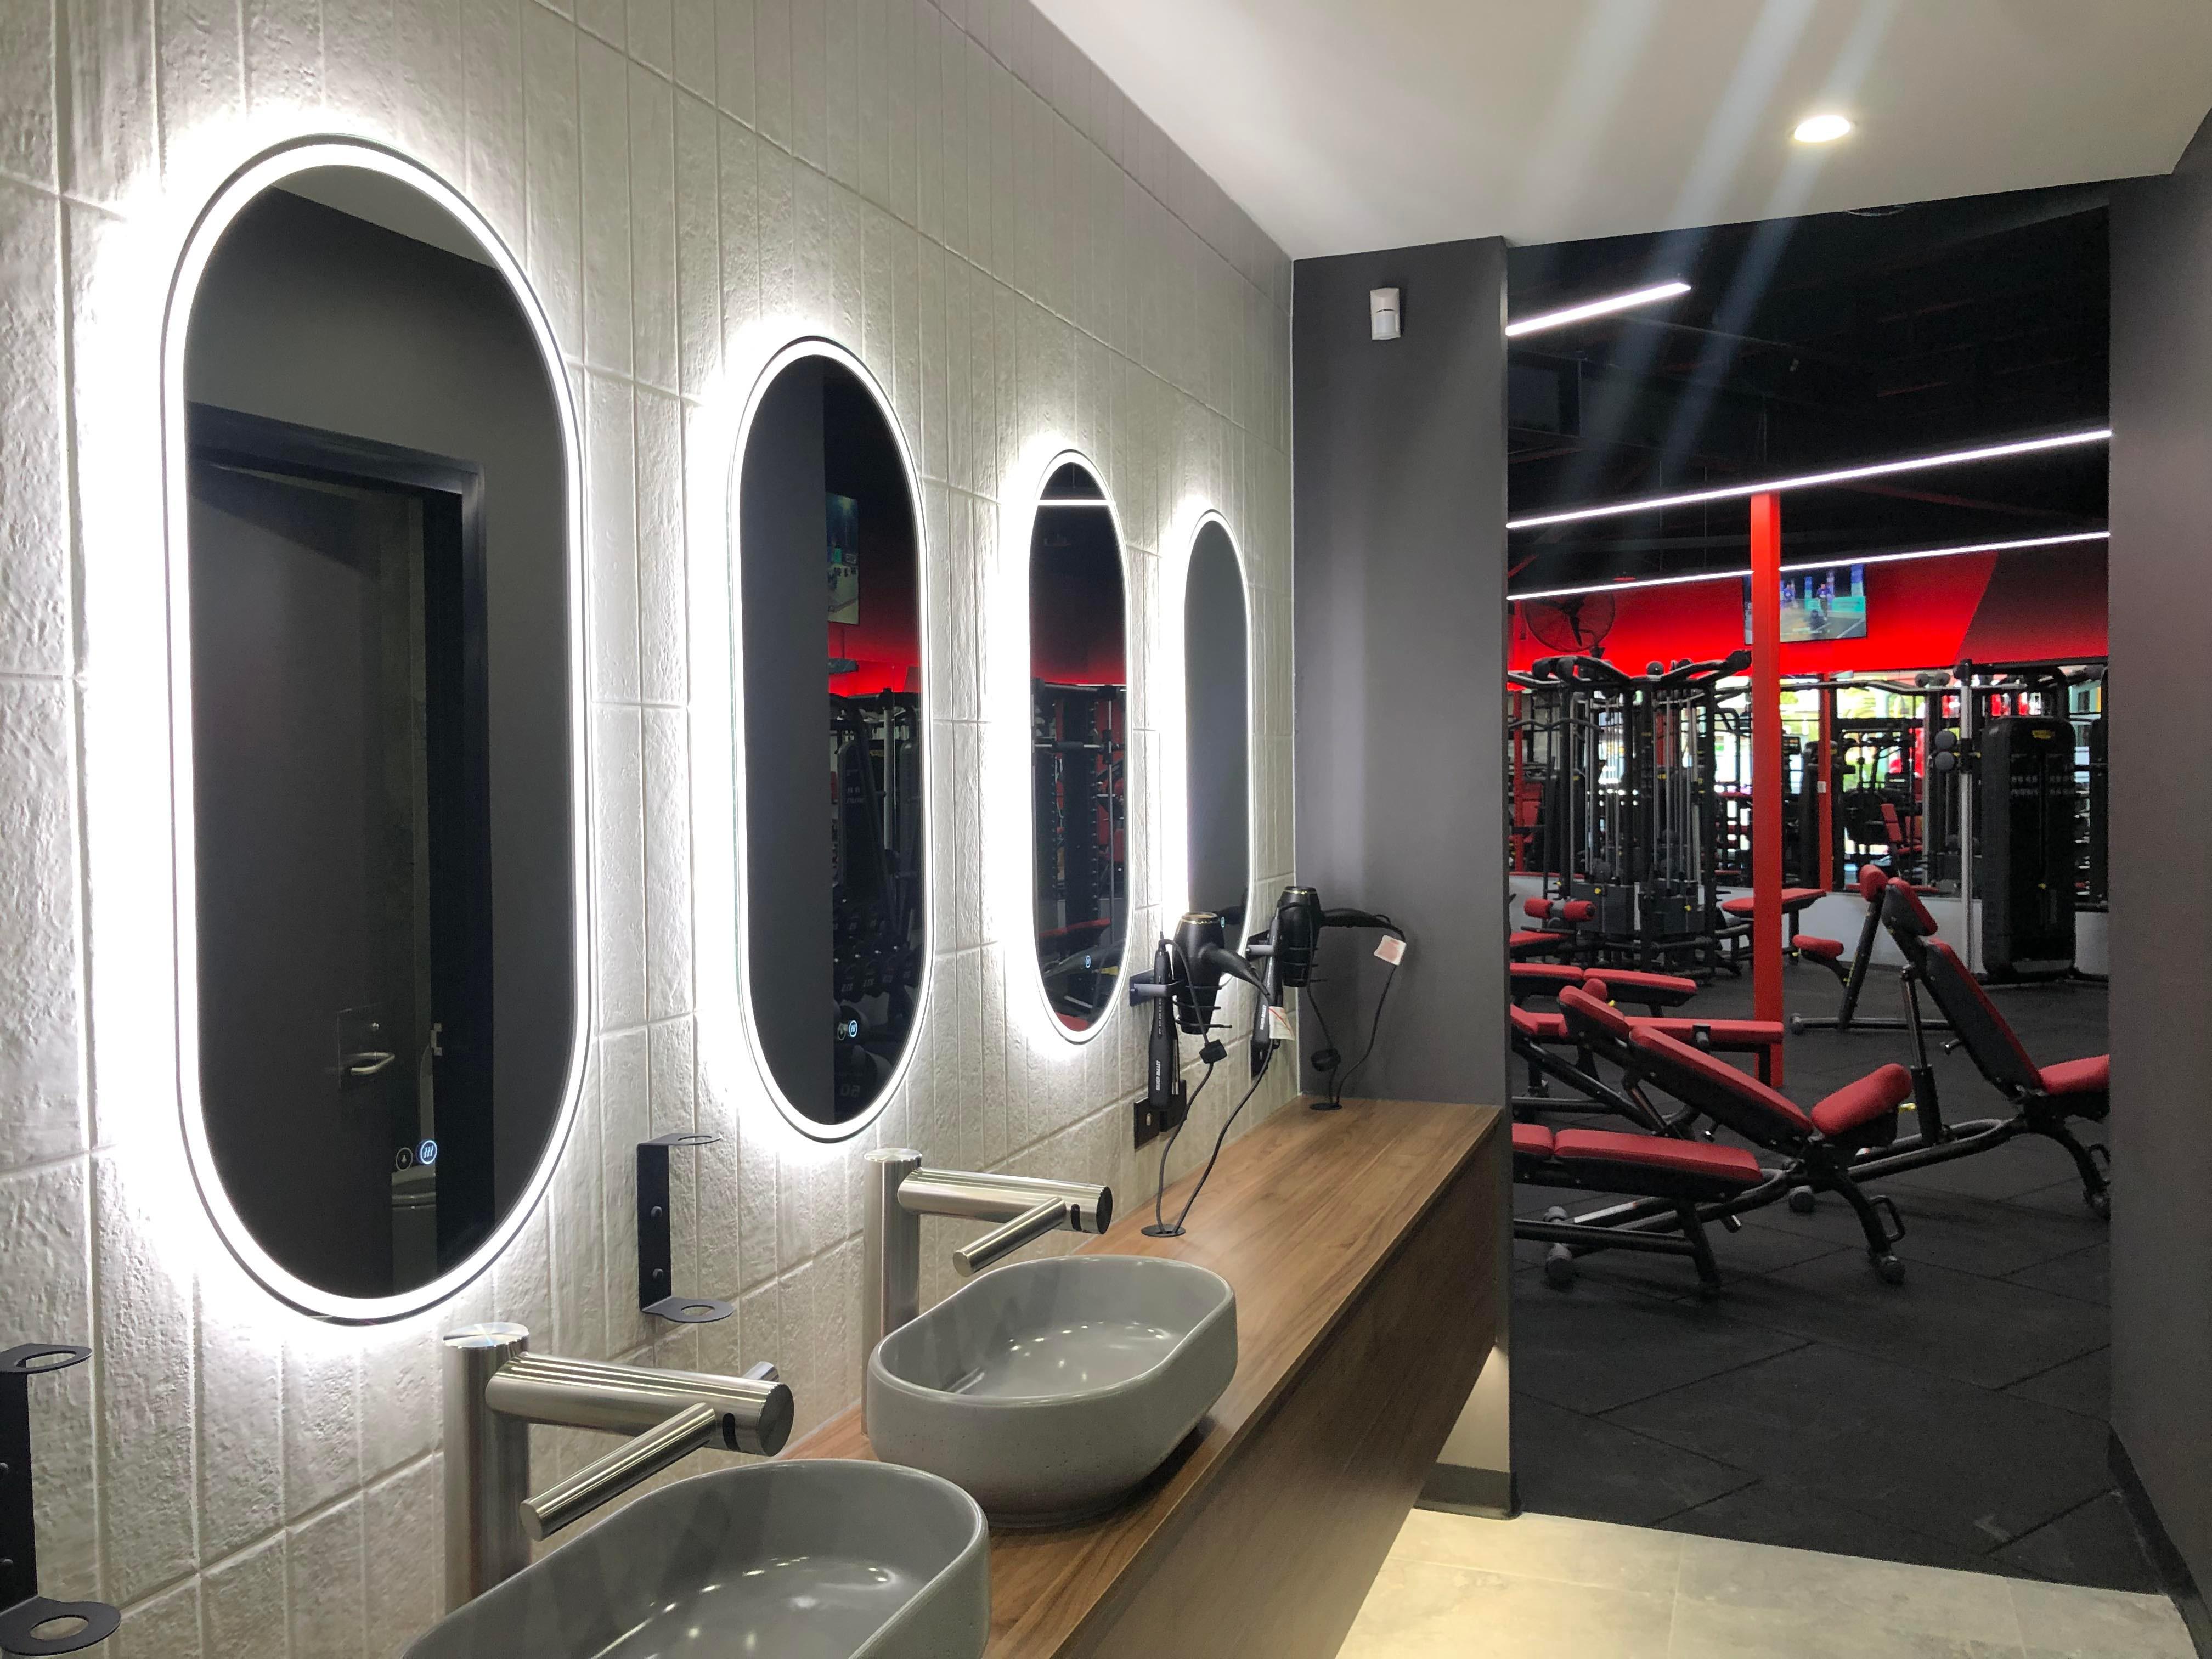 State of the Art Bathrooms with Hairdryers Snap Fitness 24/7 Mayfield Mayfield 0422 426 596